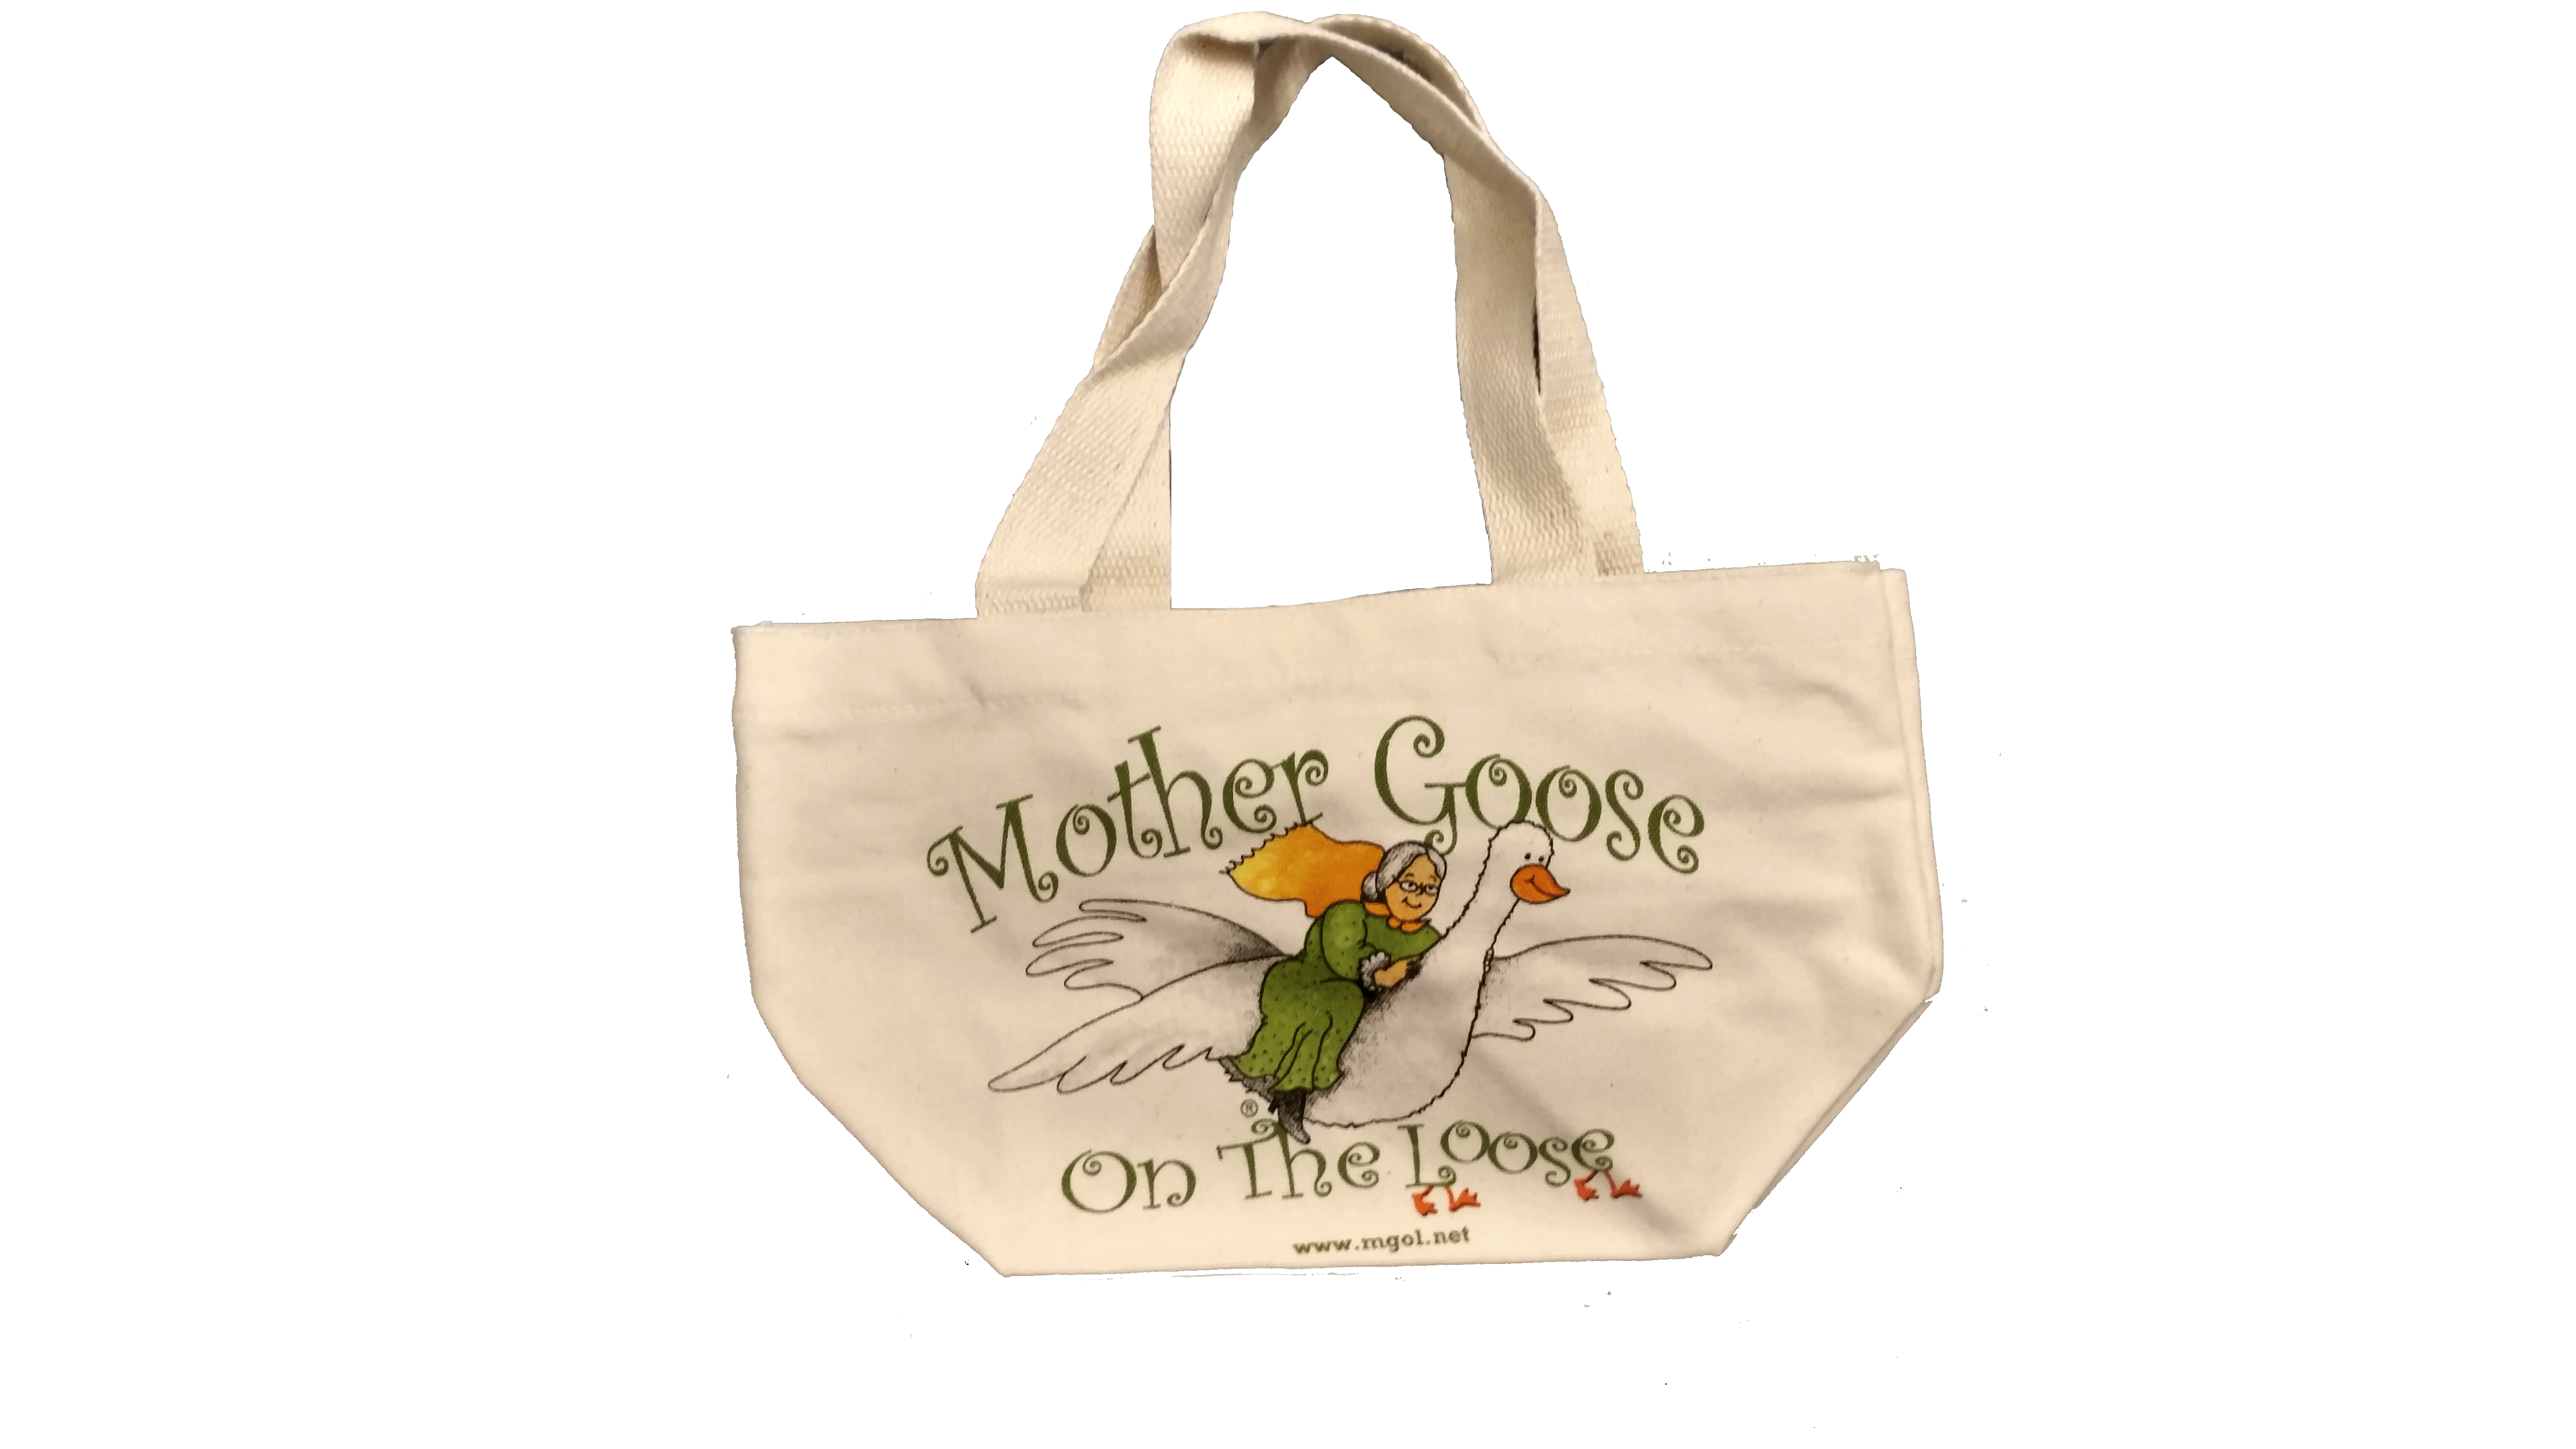 MGOL Tote bag with old logo of a white haired Mother Goose flying on her gander, for storing, distributing, and retrieving props